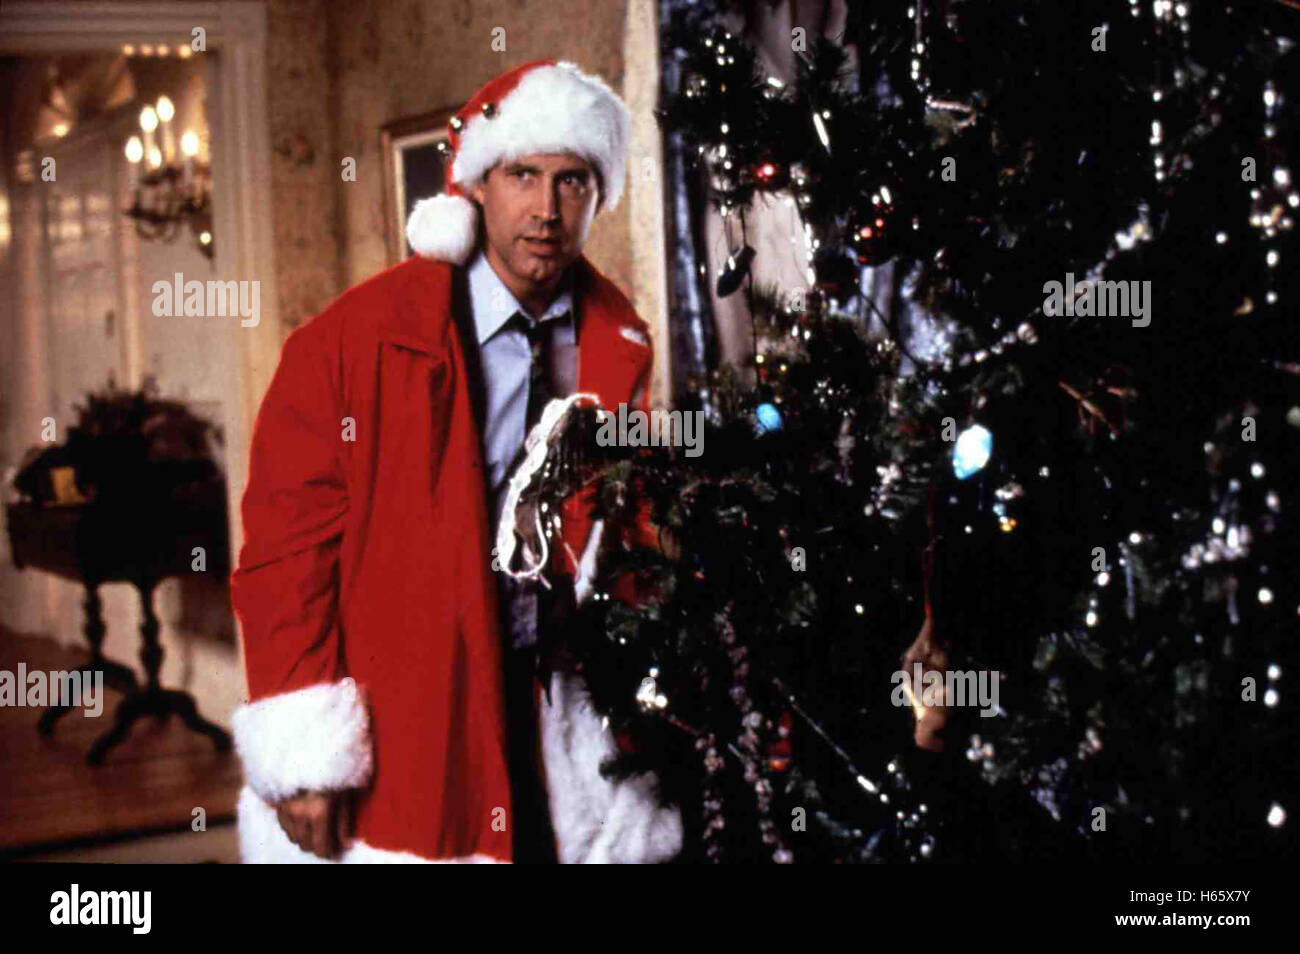 Hilfe, es weihnachtet sehr, USA 1989 aka. National Lampoon's Christmas Vacation, Direttore: Geremia S. Chechik, attori/stelle: Chevy Chase, Beverly D'Angelo, Juliette Lewis Foto Stock